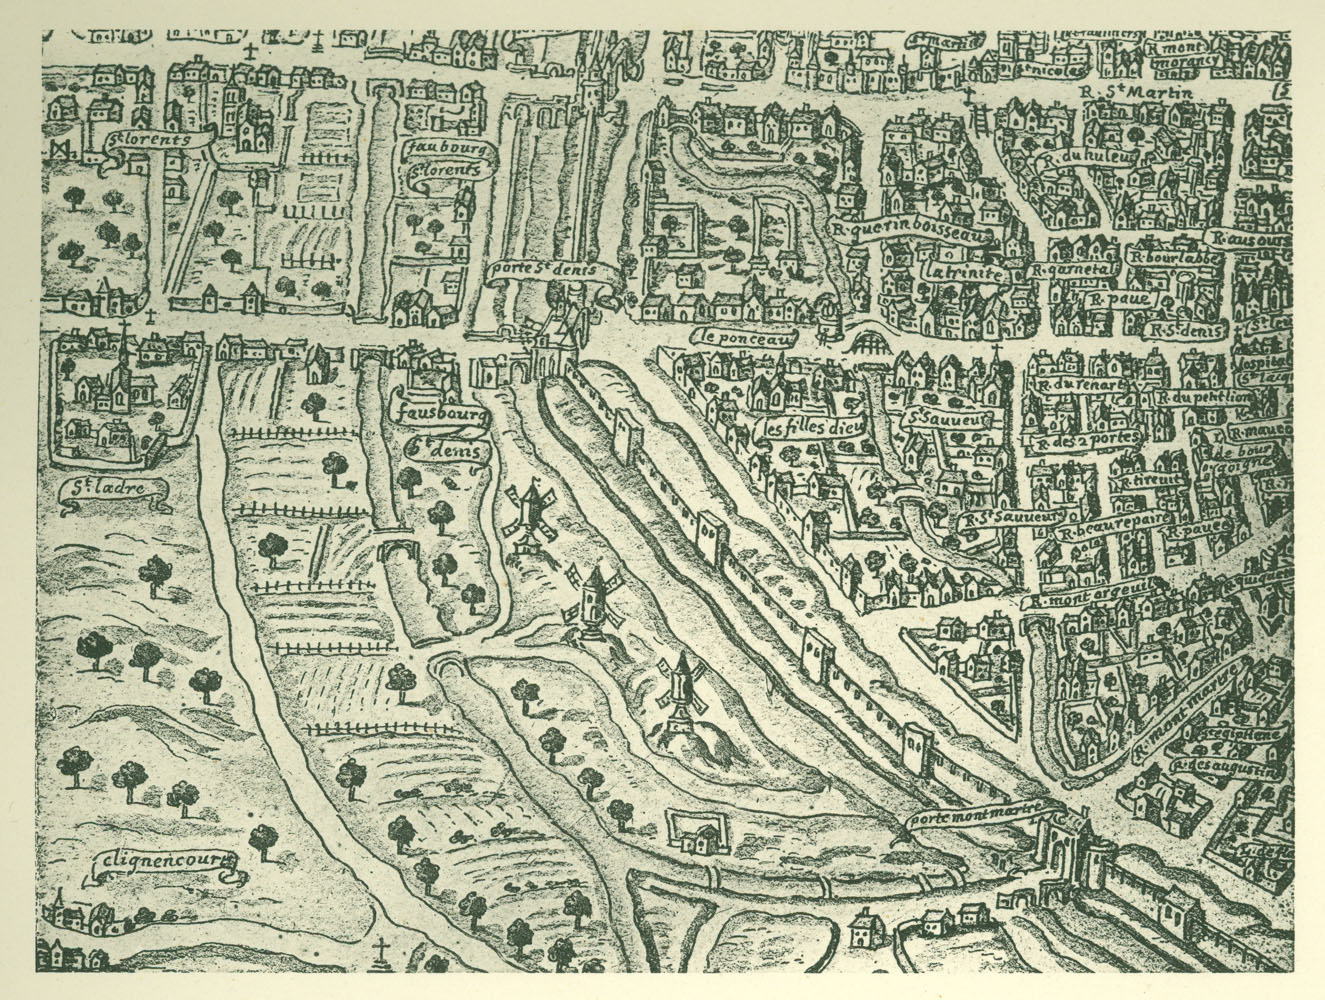 Fragment from the Tapisserie map of Paris 